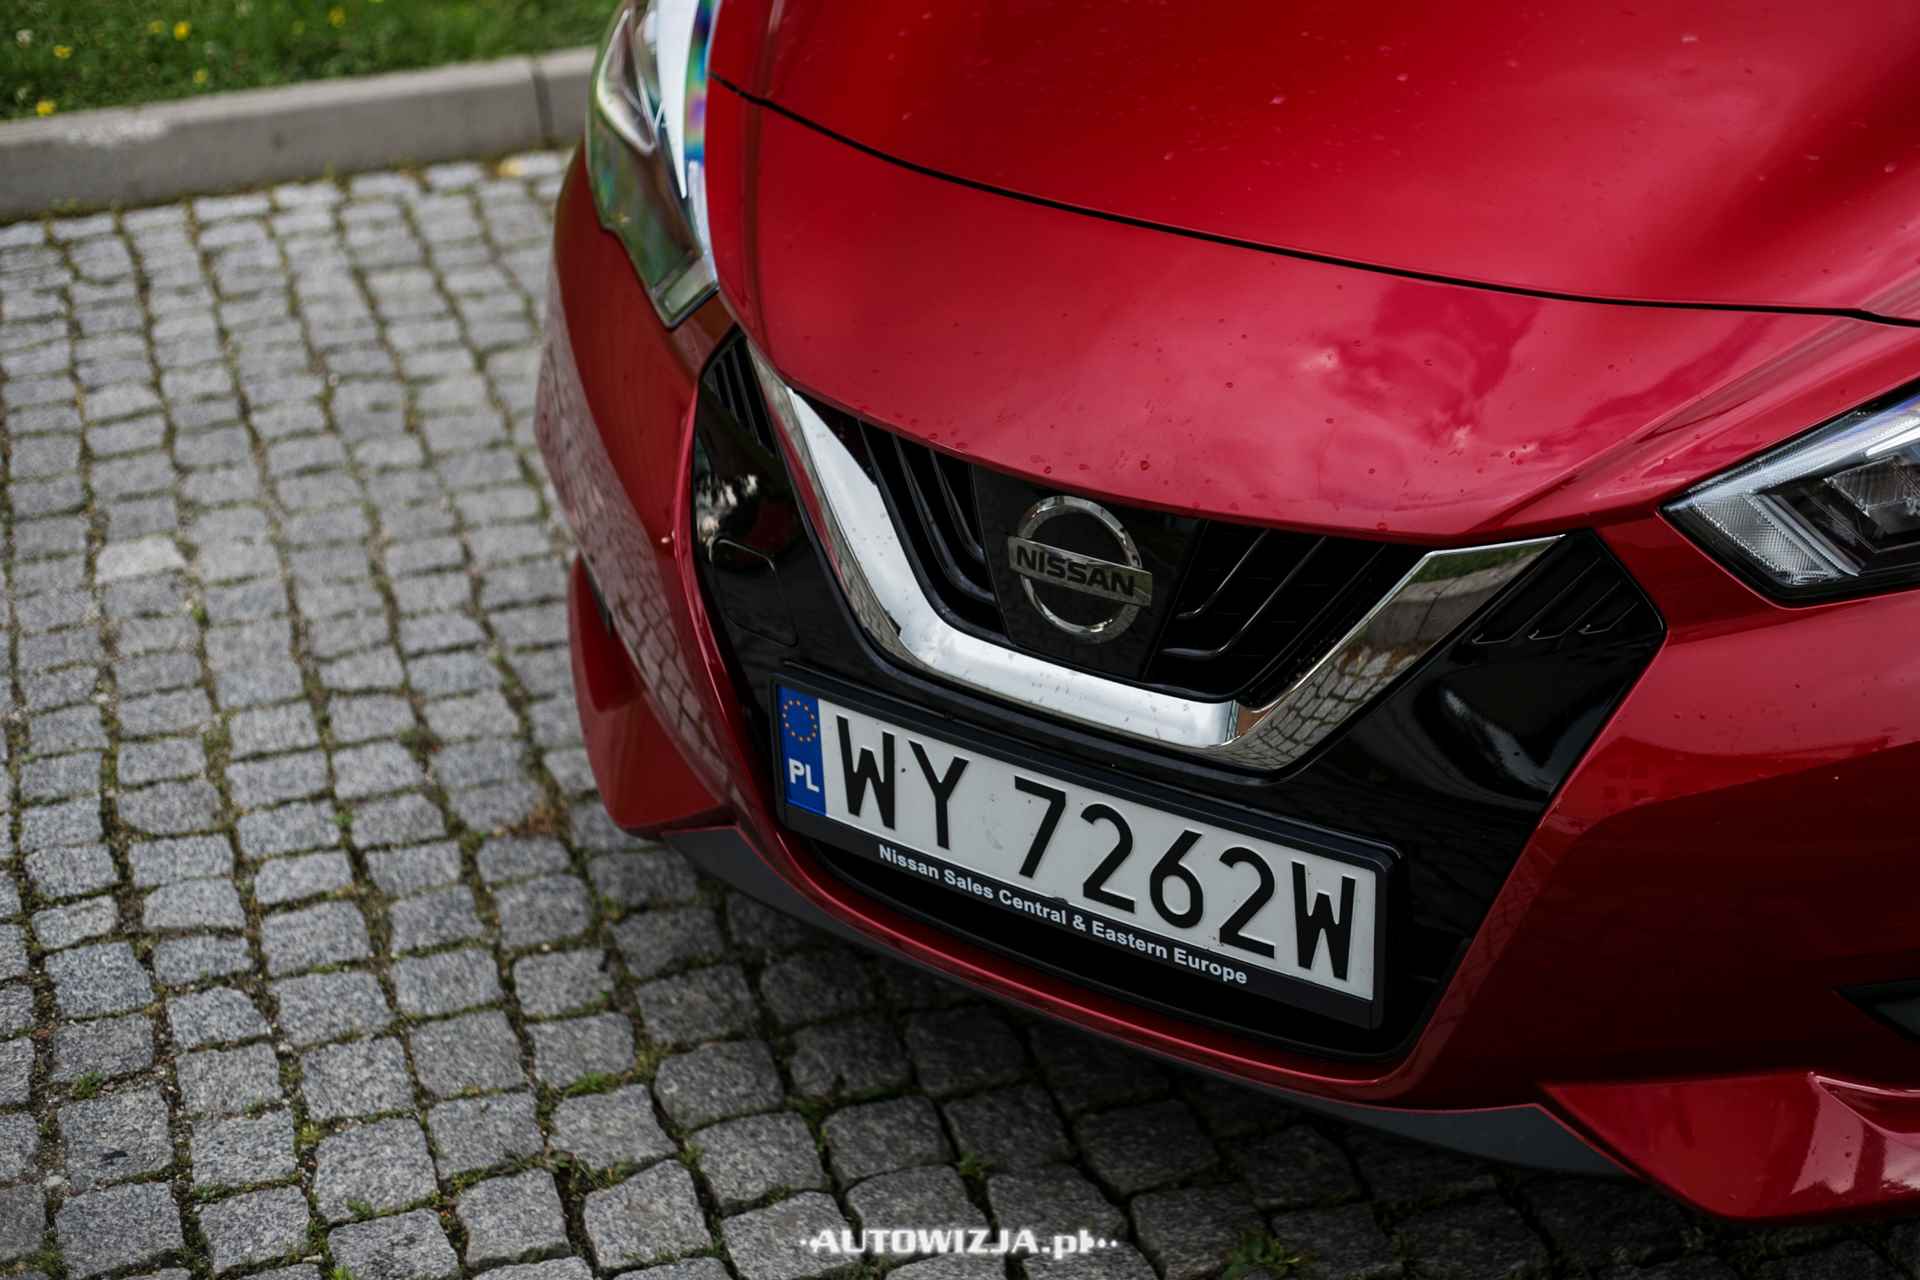 Nowy Nissan Micra NConnecta 0.9 IGT 90 KM AUTO TEST